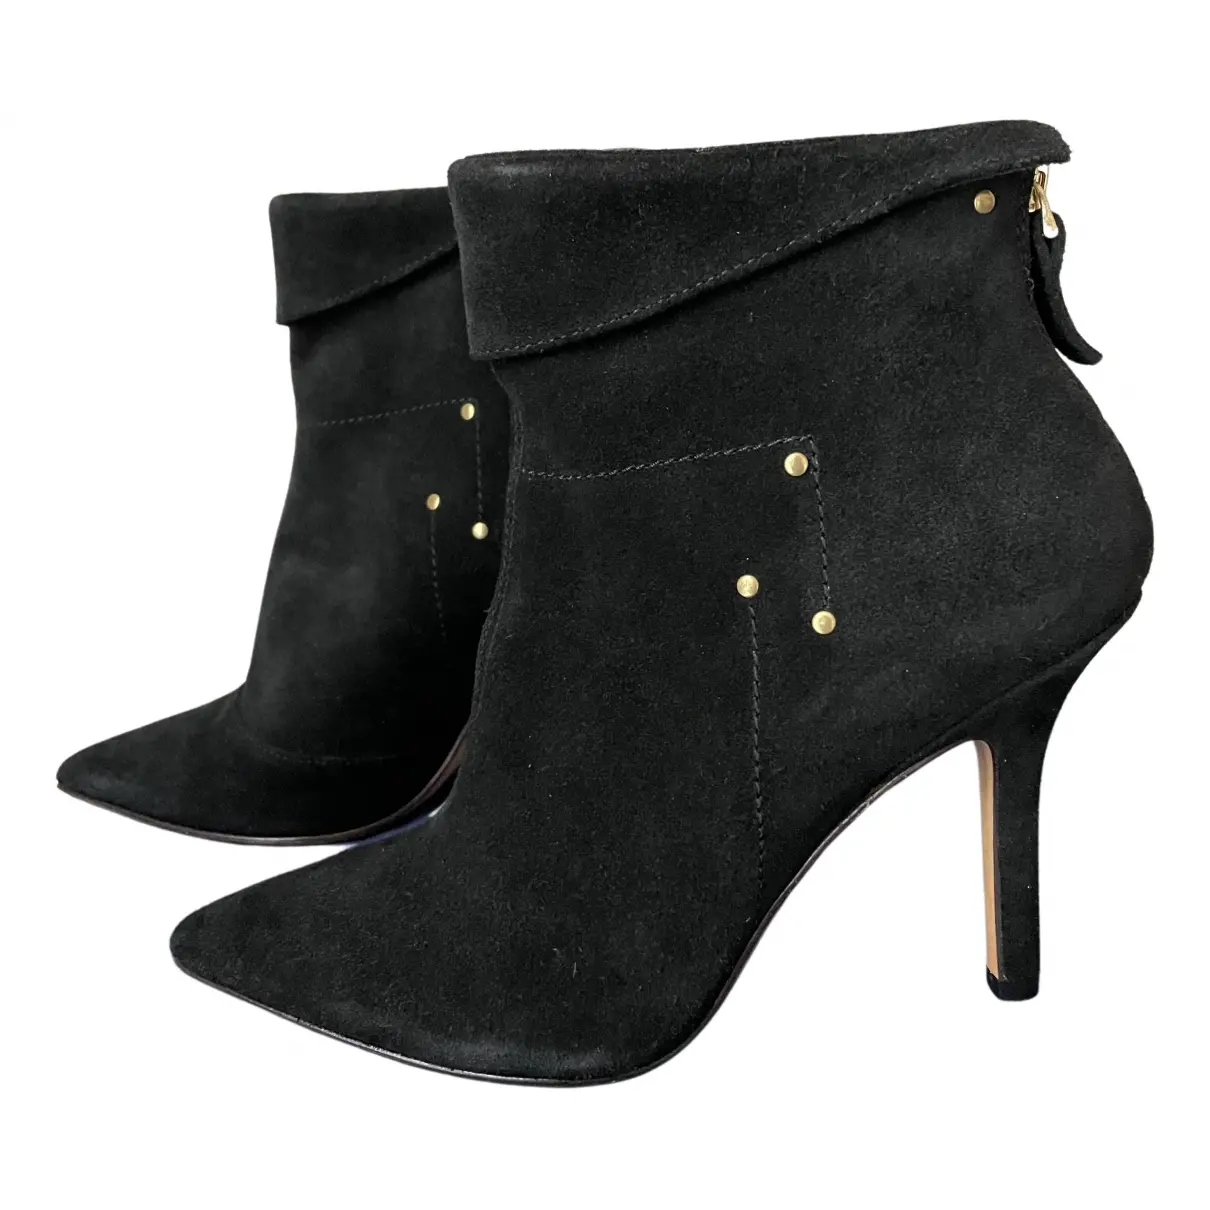 Ankle boots Jerome Dreyfuss